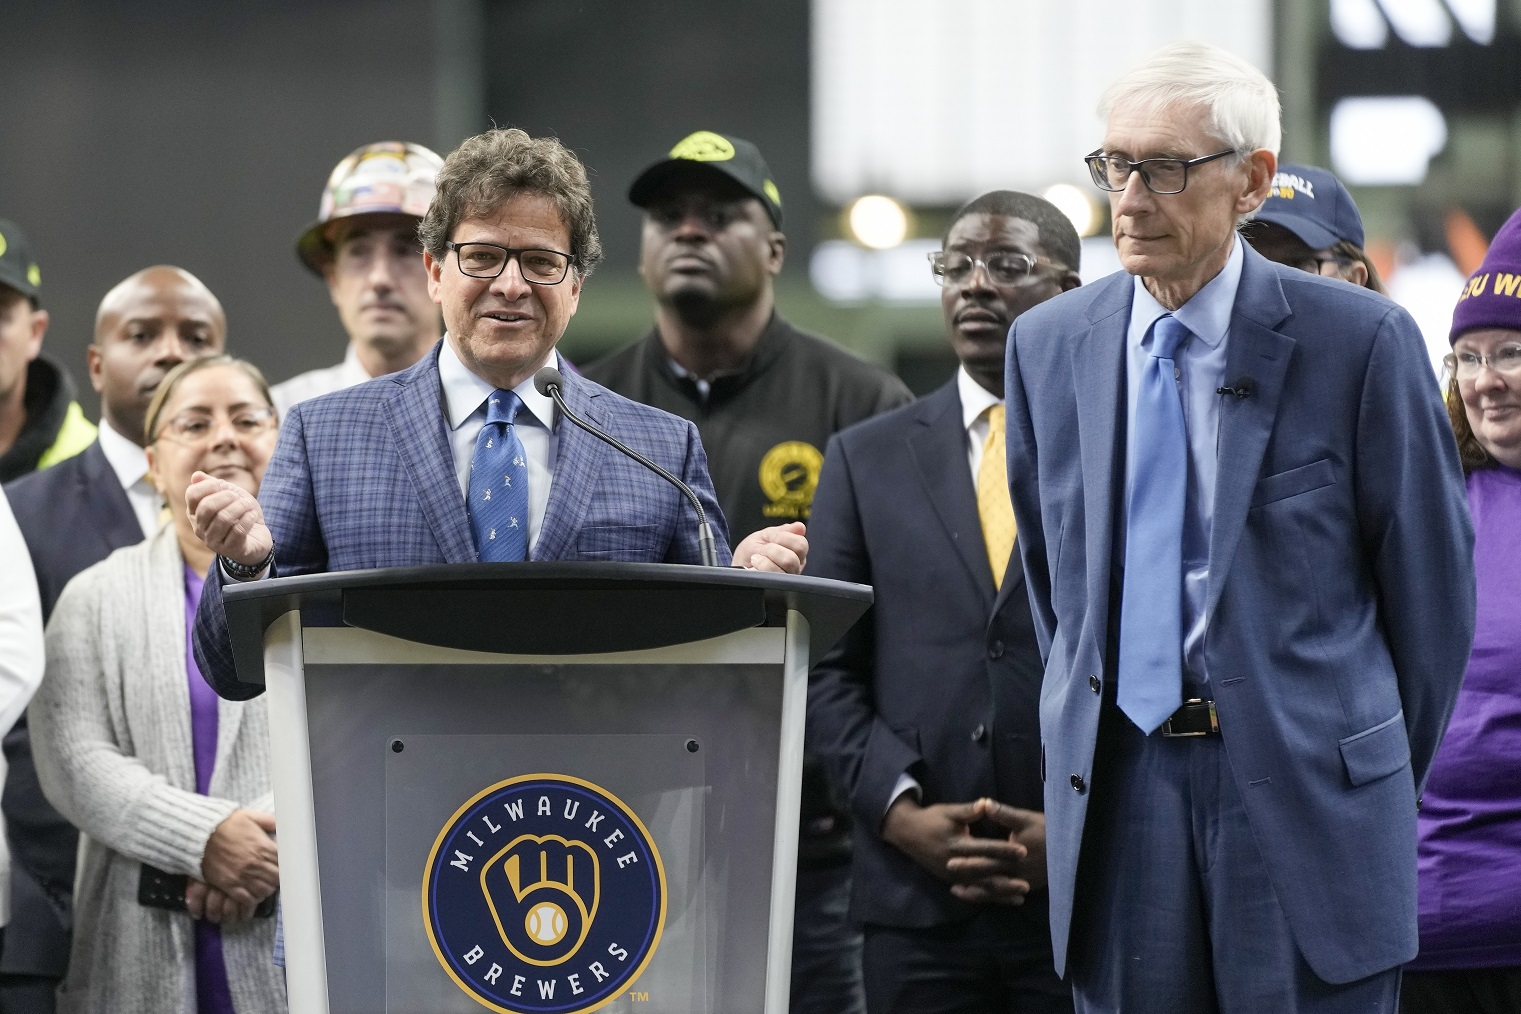 Wisconsin governor signs off on $501 million public funding plan to fix, upgrade Brewers stadium